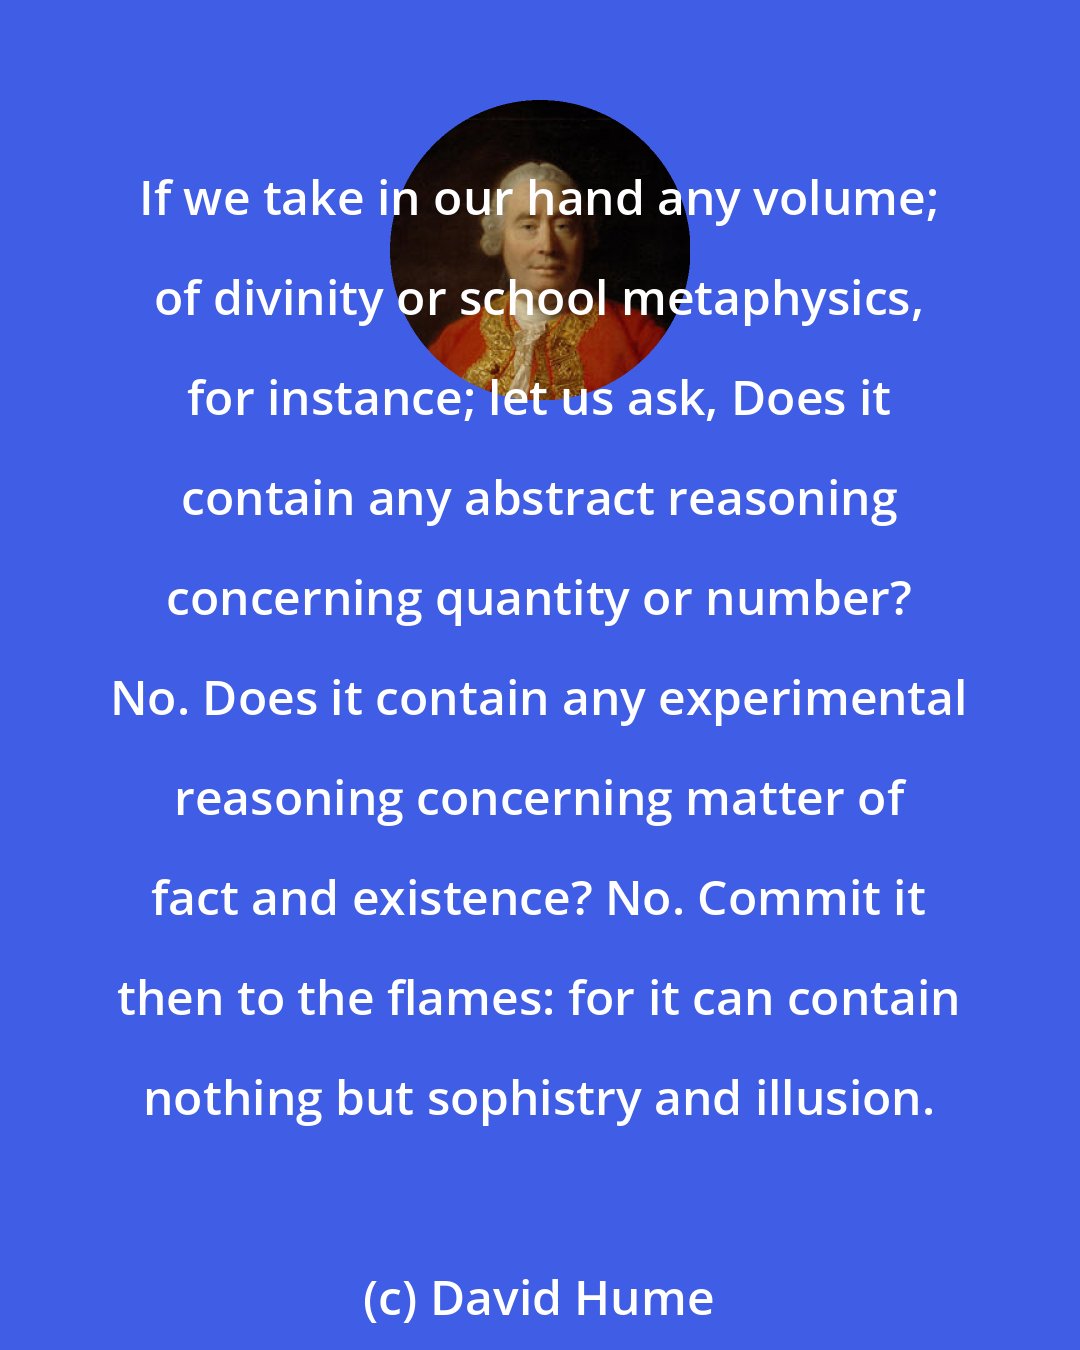 David Hume: If we take in our hand any volume; of divinity or school metaphysics, for instance; let us ask, Does it contain any abstract reasoning concerning quantity or number? No. Does it contain any experimental reasoning concerning matter of fact and existence? No. Commit it then to the flames: for it can contain nothing but sophistry and illusion.